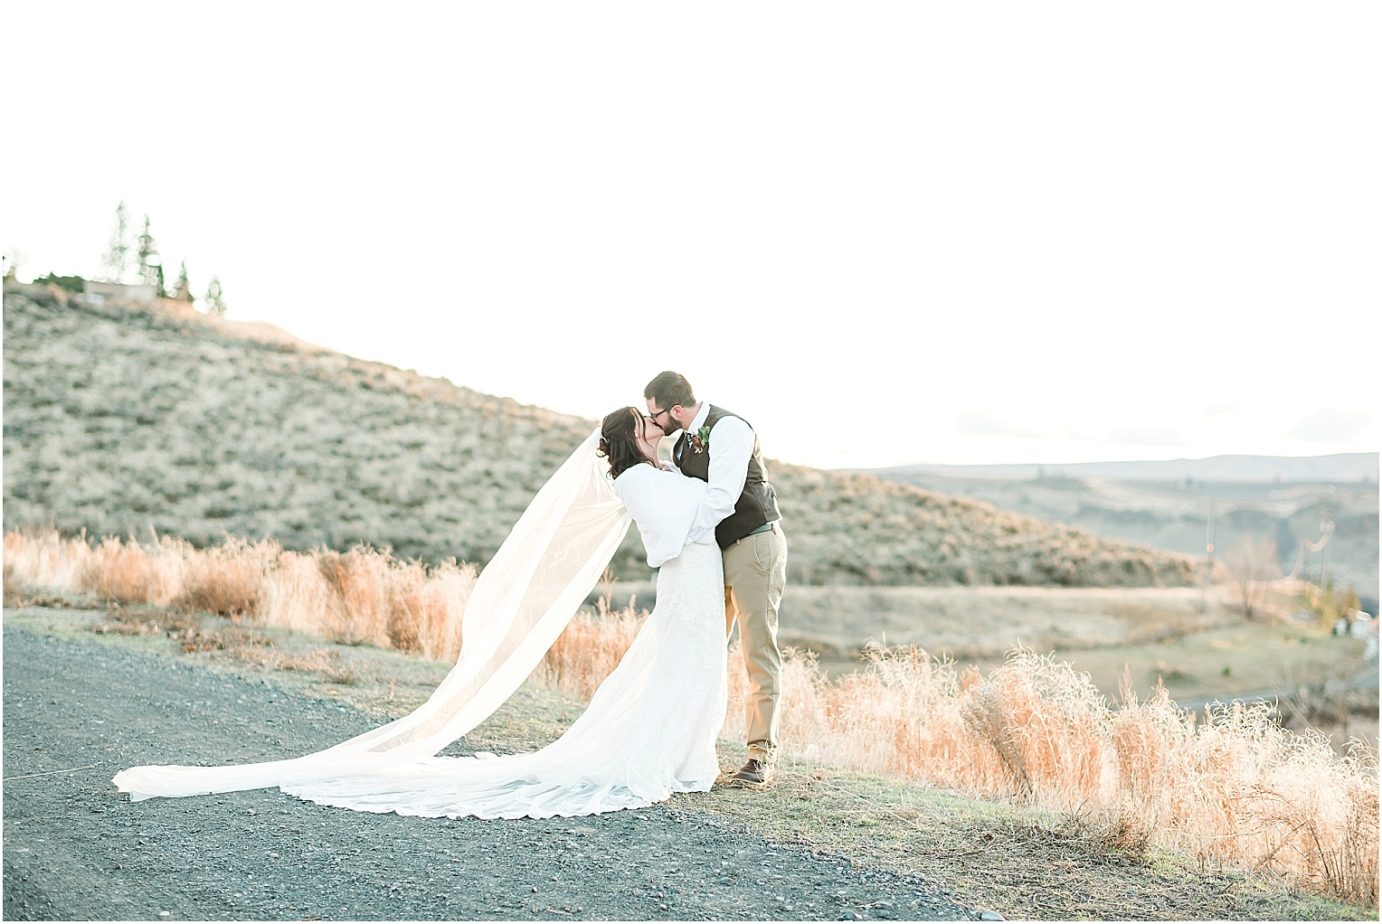 Fontaine Estate Winery Wedding just married sunset portraits with long veil